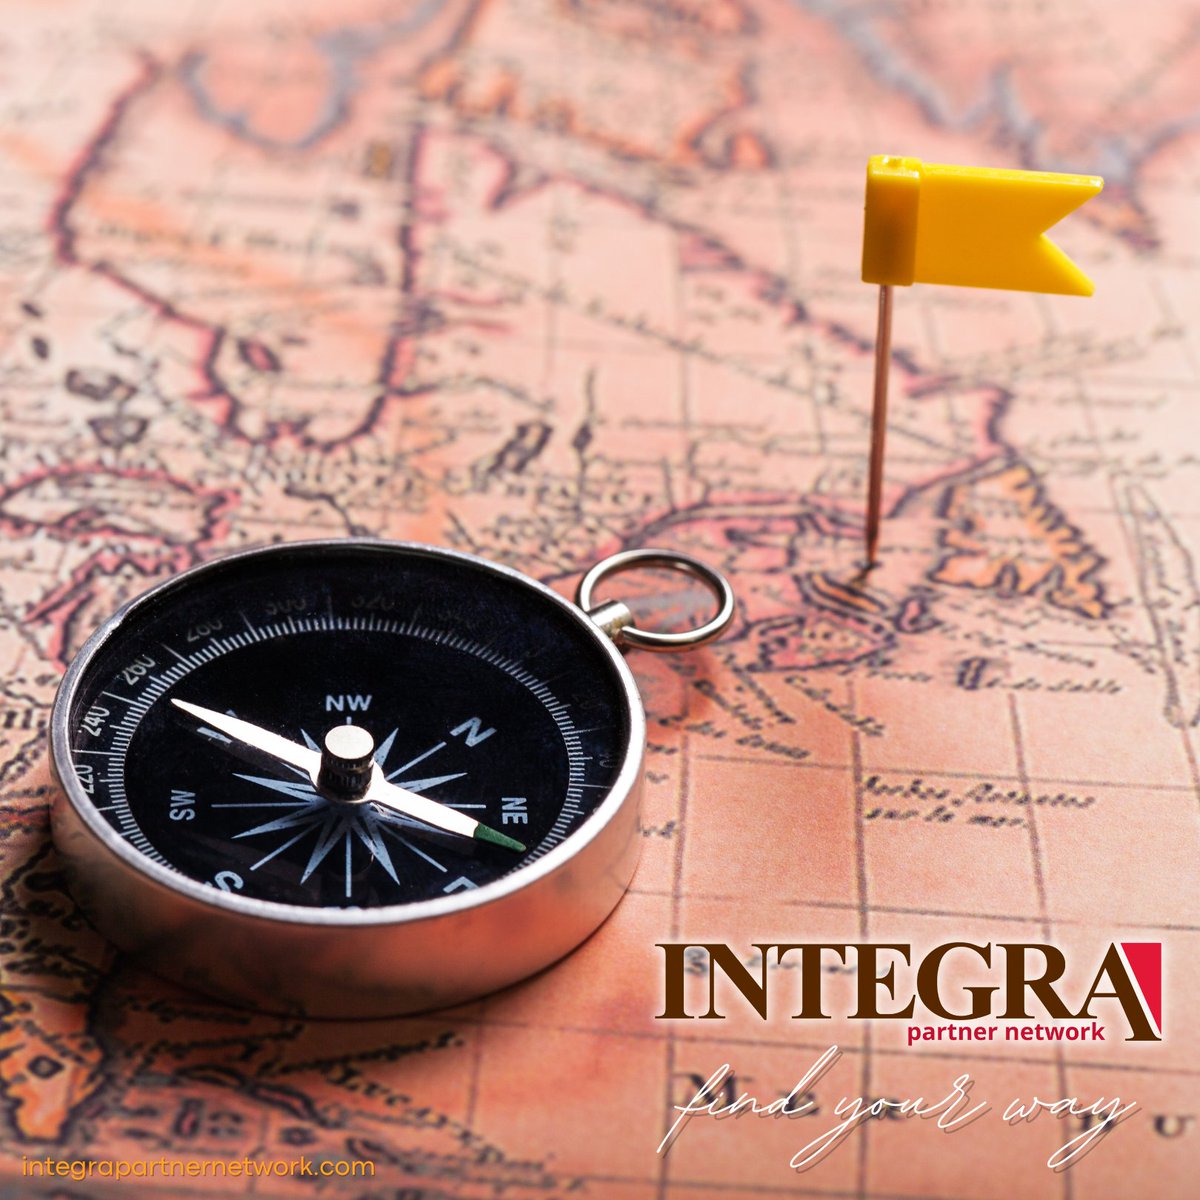 Looking for direction as an independent agent? Find your way to the Integra Partner Network.

#independentagent #insurance #independentagency #integra #integrapartnernetwork #insuranceagent #insuranceagency #entrepreneur #success